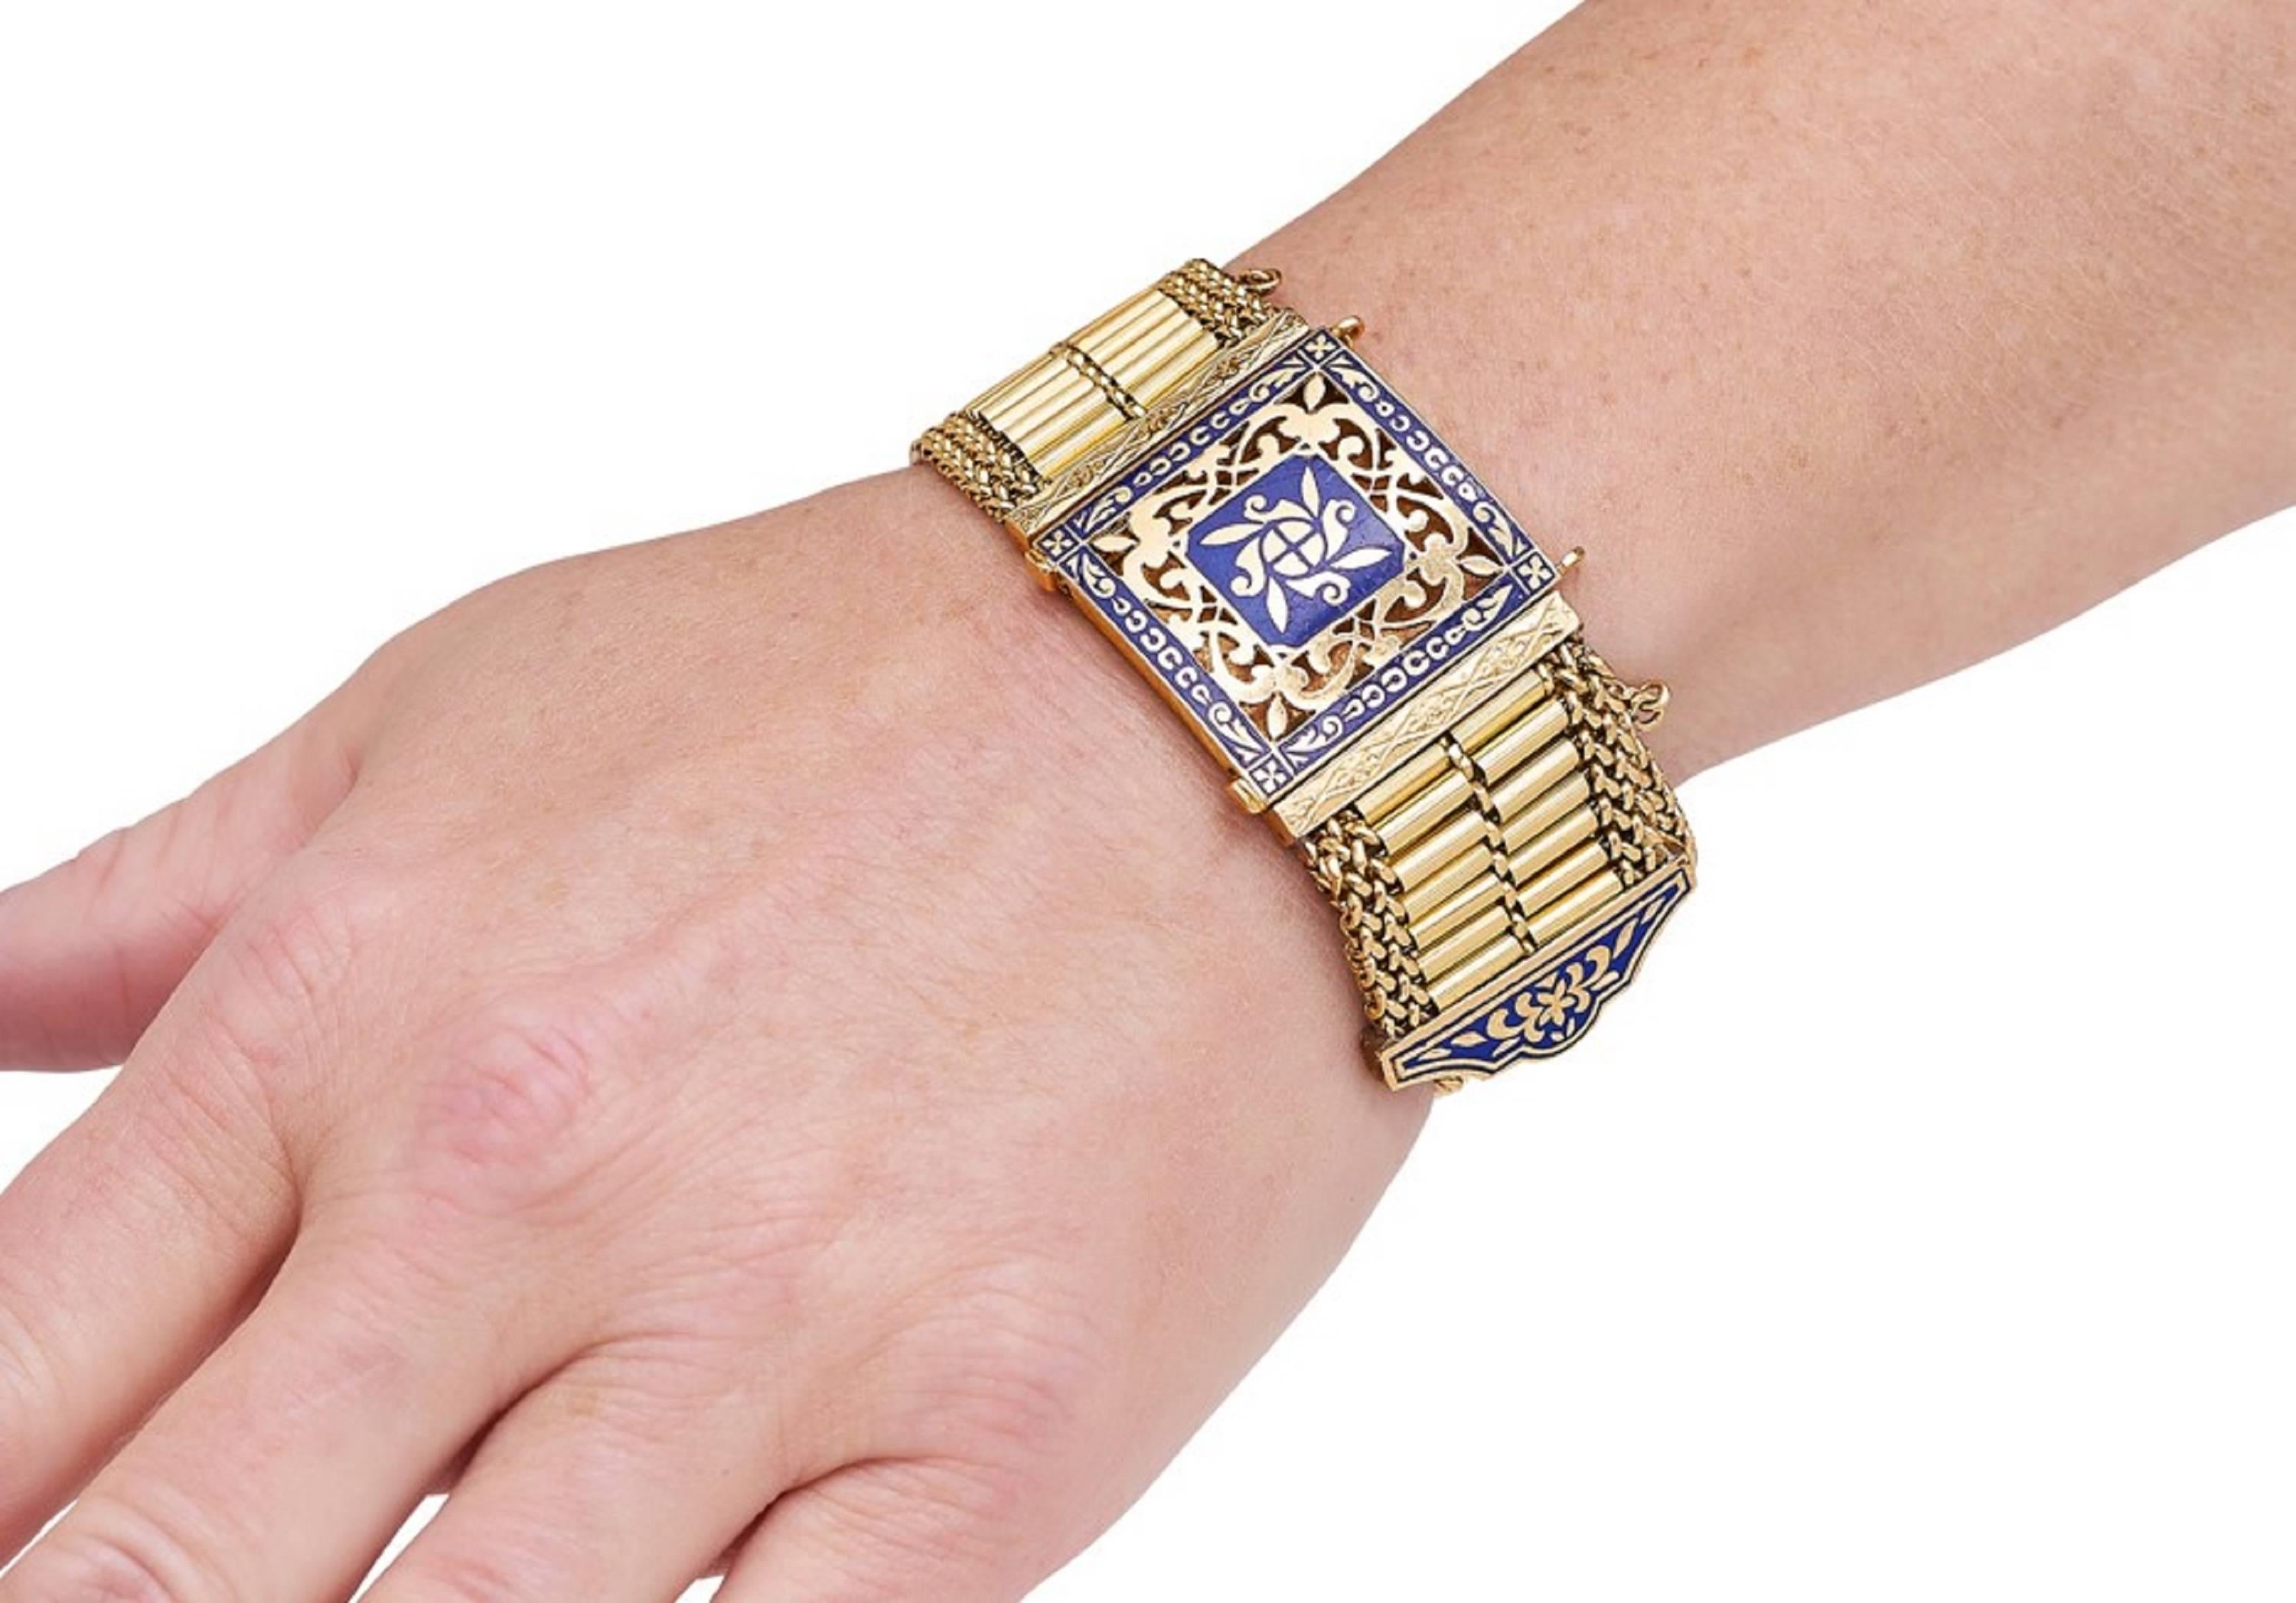 Flexible 14 karat gold, tubular mesh designed buckle bracelet. The center piece is pierced in an intricate design and decorated with inlaid blue enamel  as is the end of the buckle, and completed by a slide closure. 
* Very unique